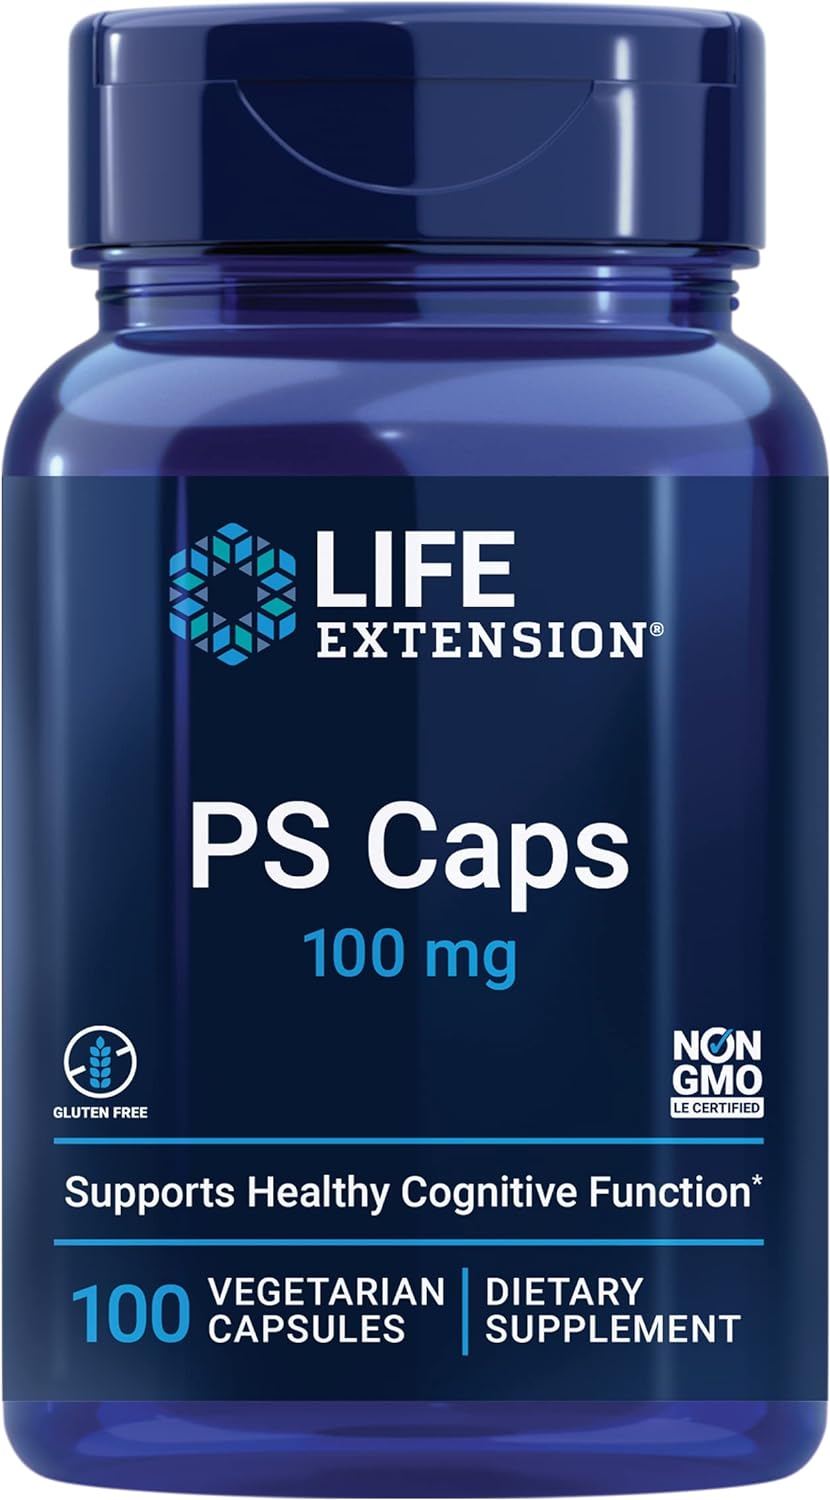 Life Extension PS Caps (Phosphatidylcholine) 100mg